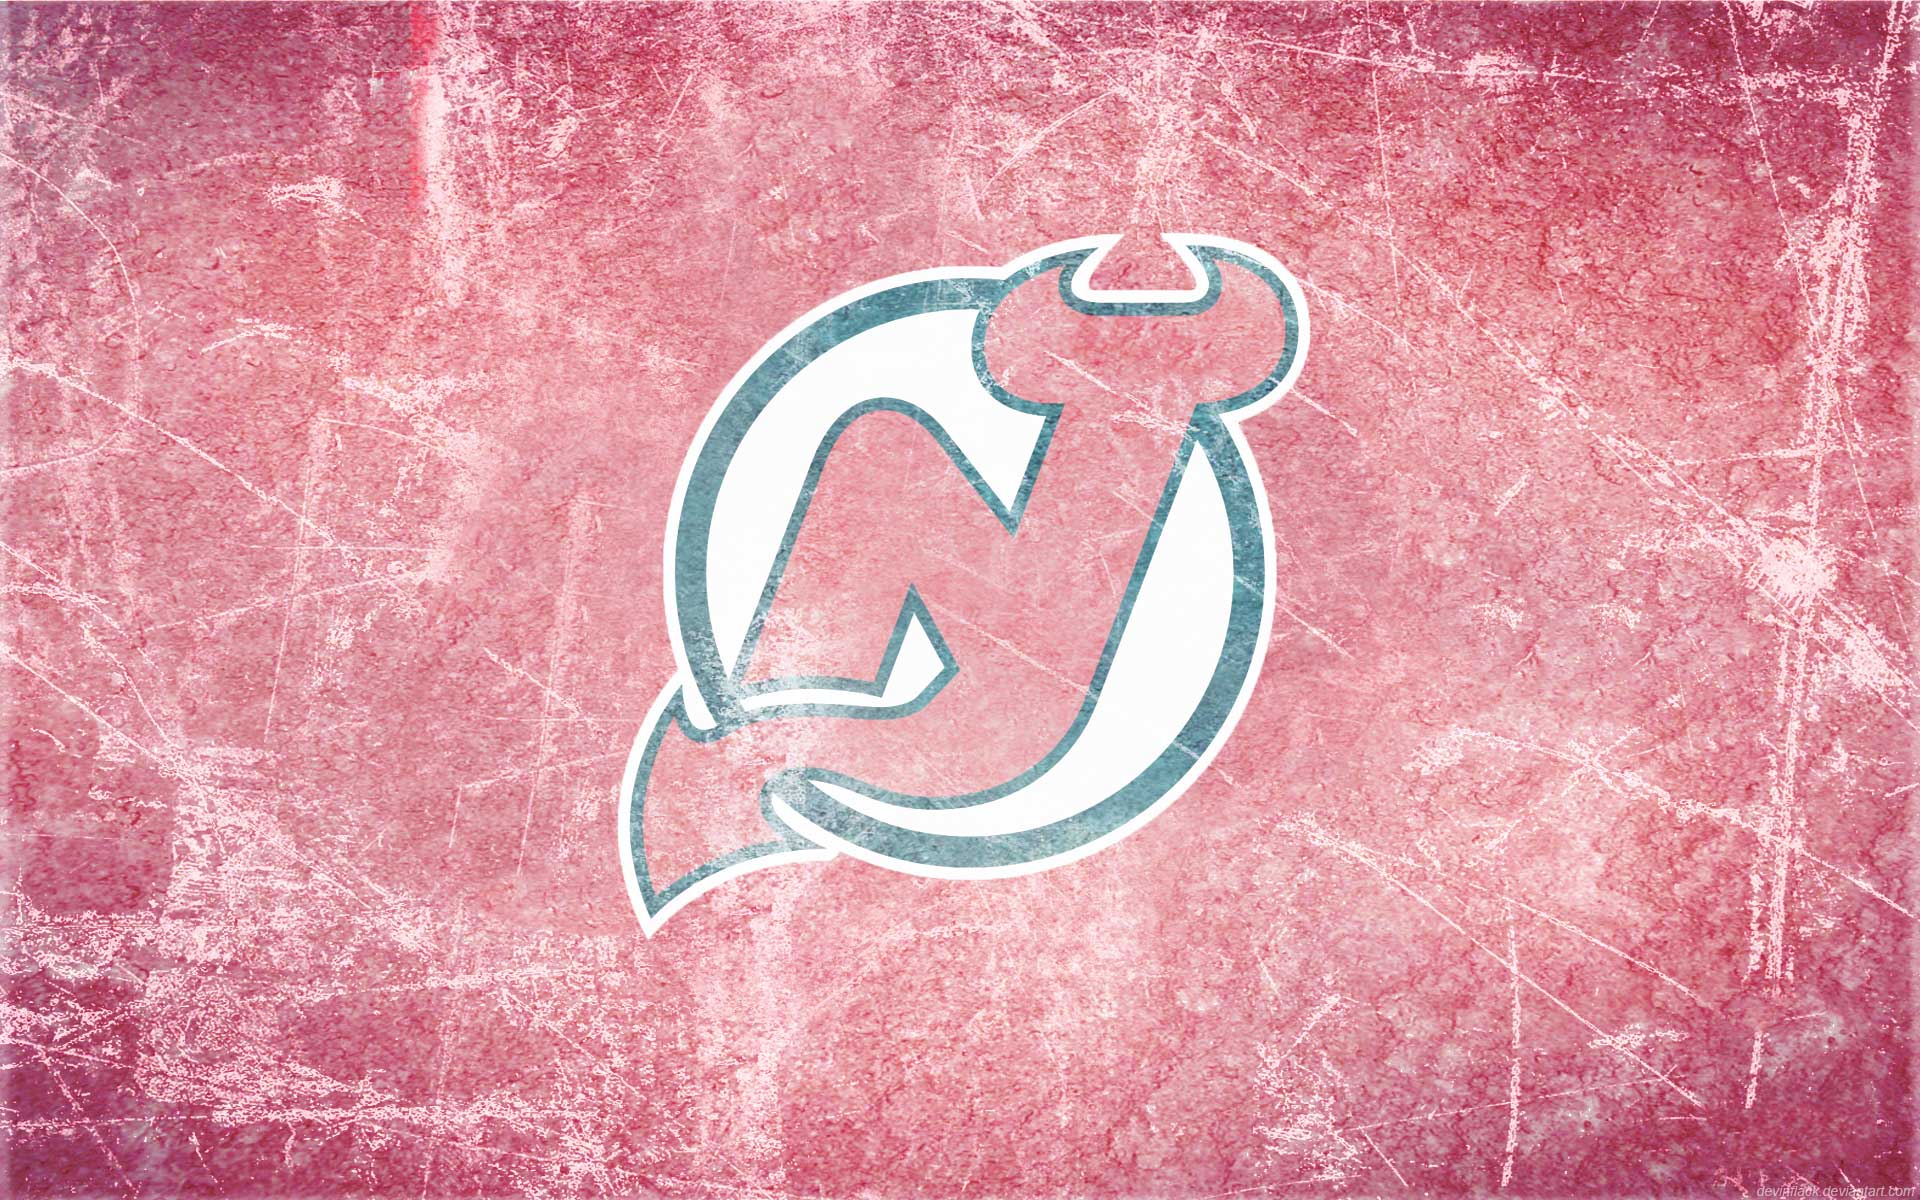 New Jersey Devils Wallpapers  Wallpaper Cave